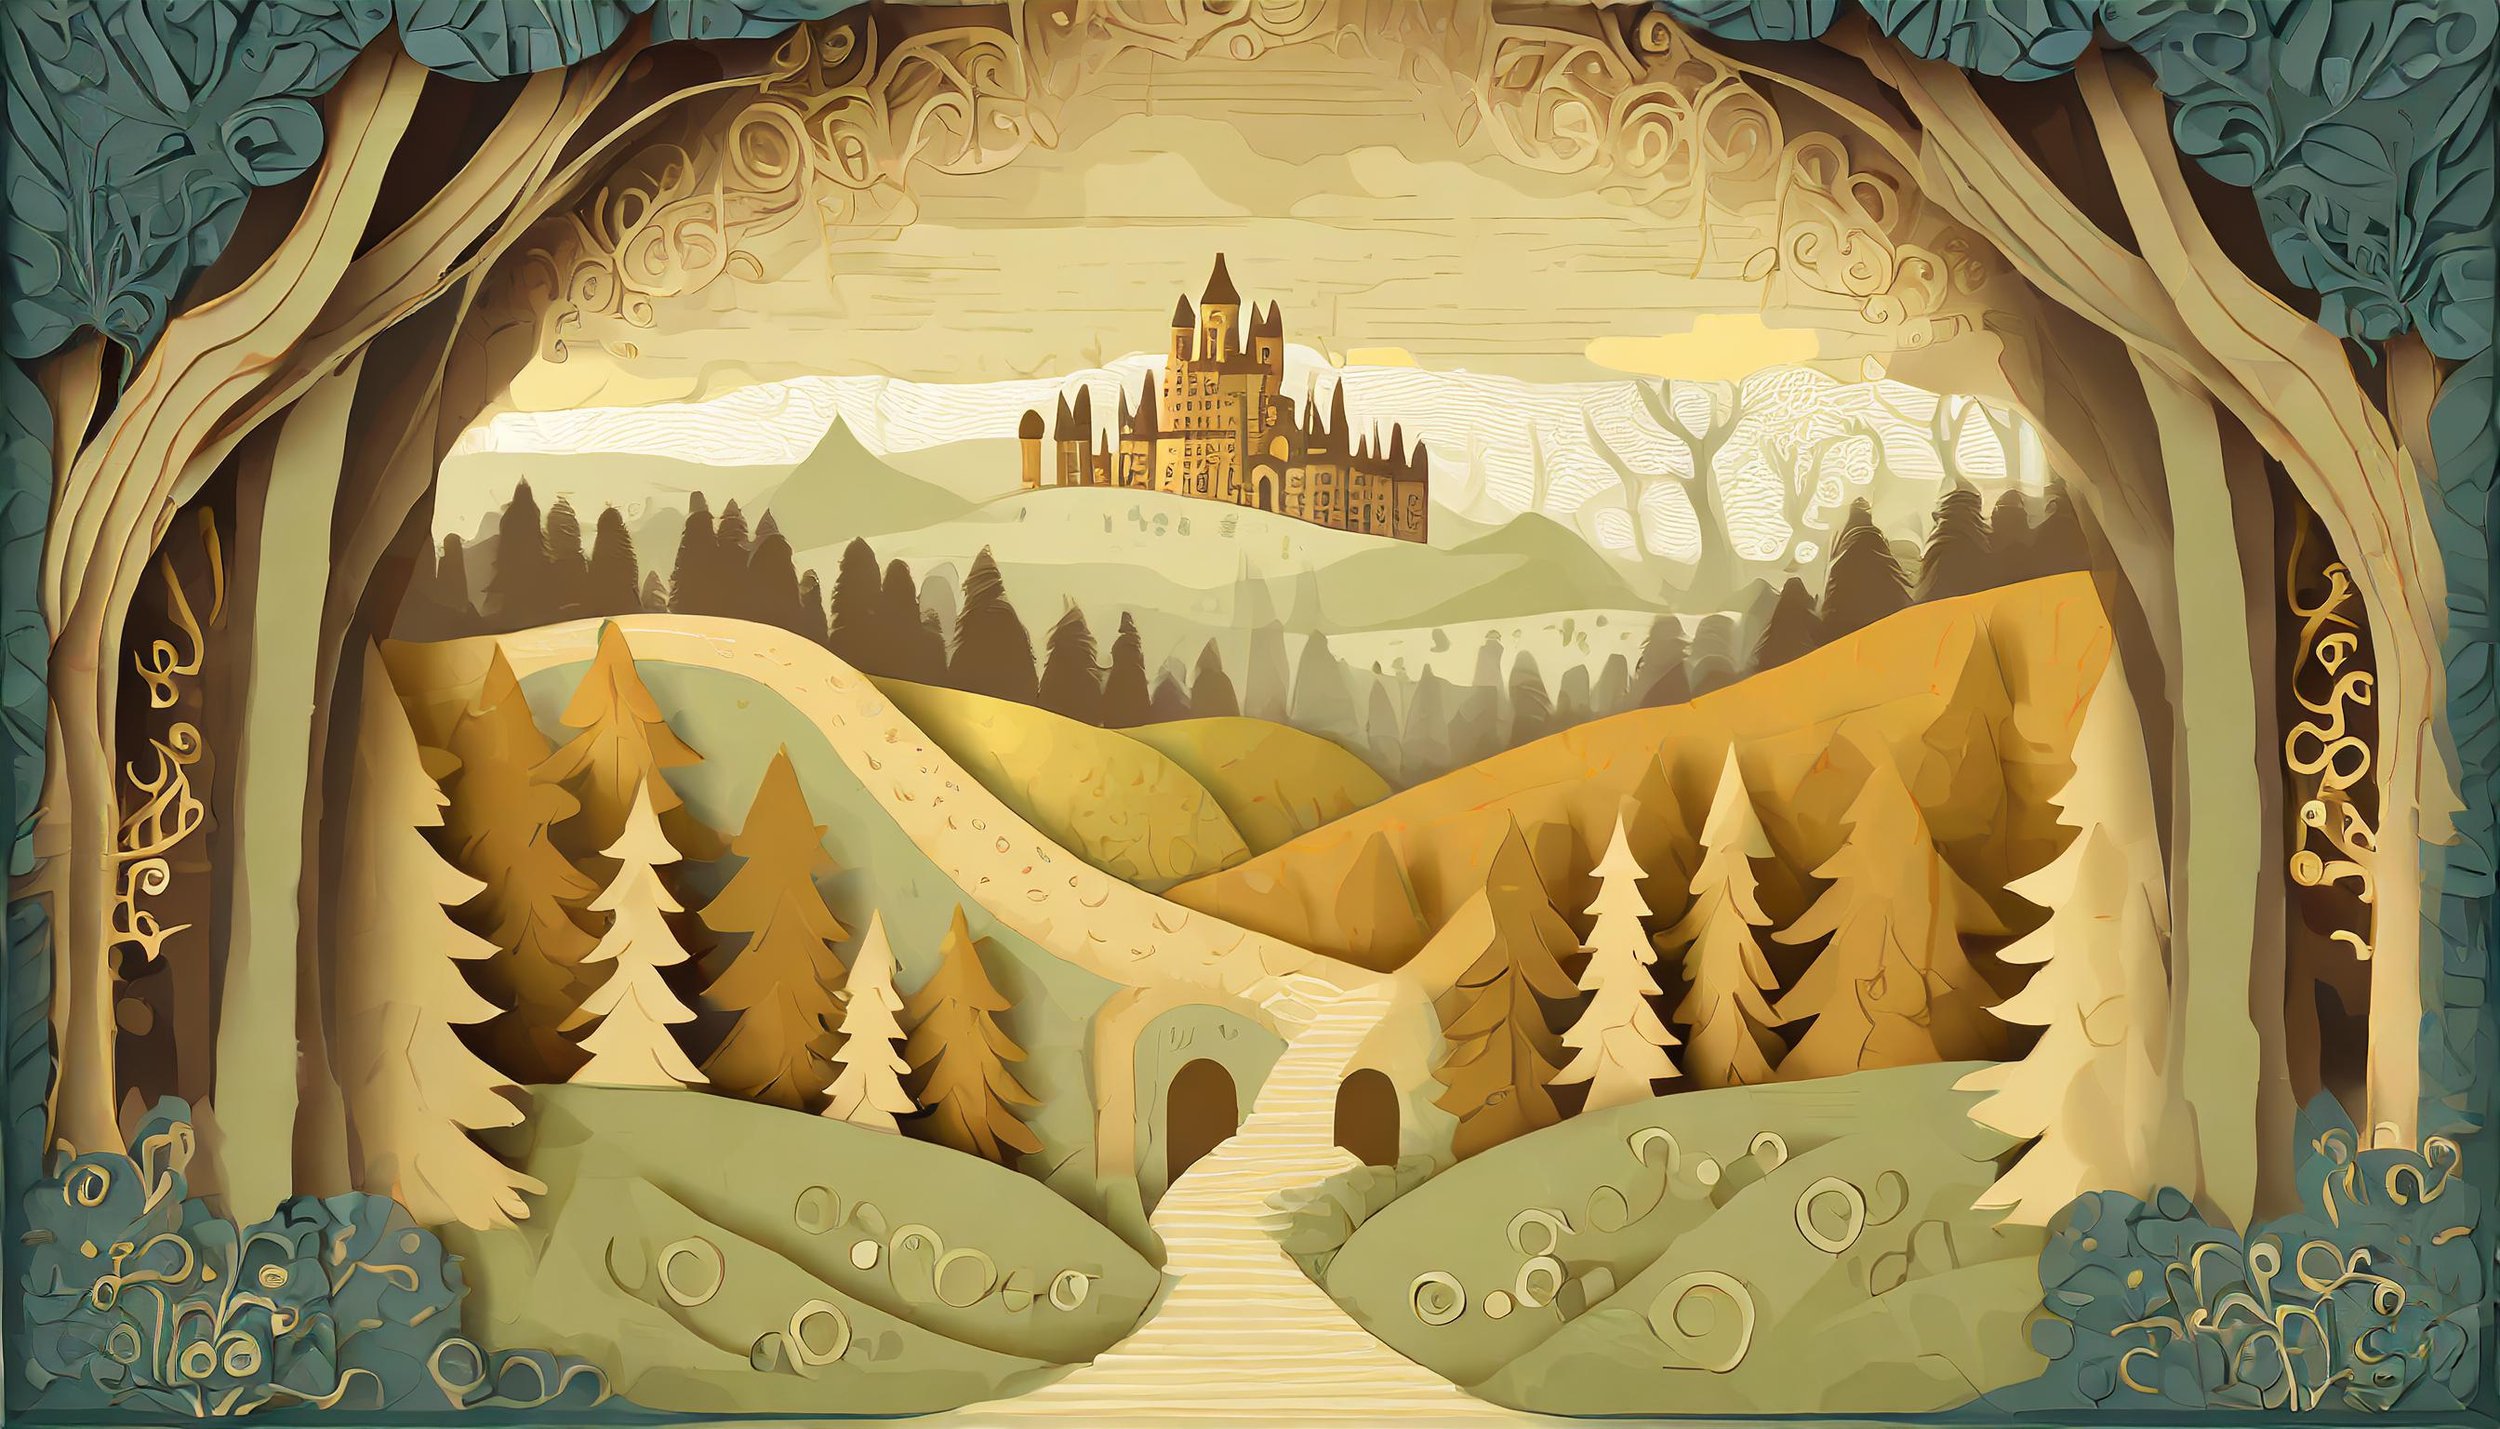 Firefly flat illustration of the entrance to a medieval forest, castle in the far background 60192.jpg